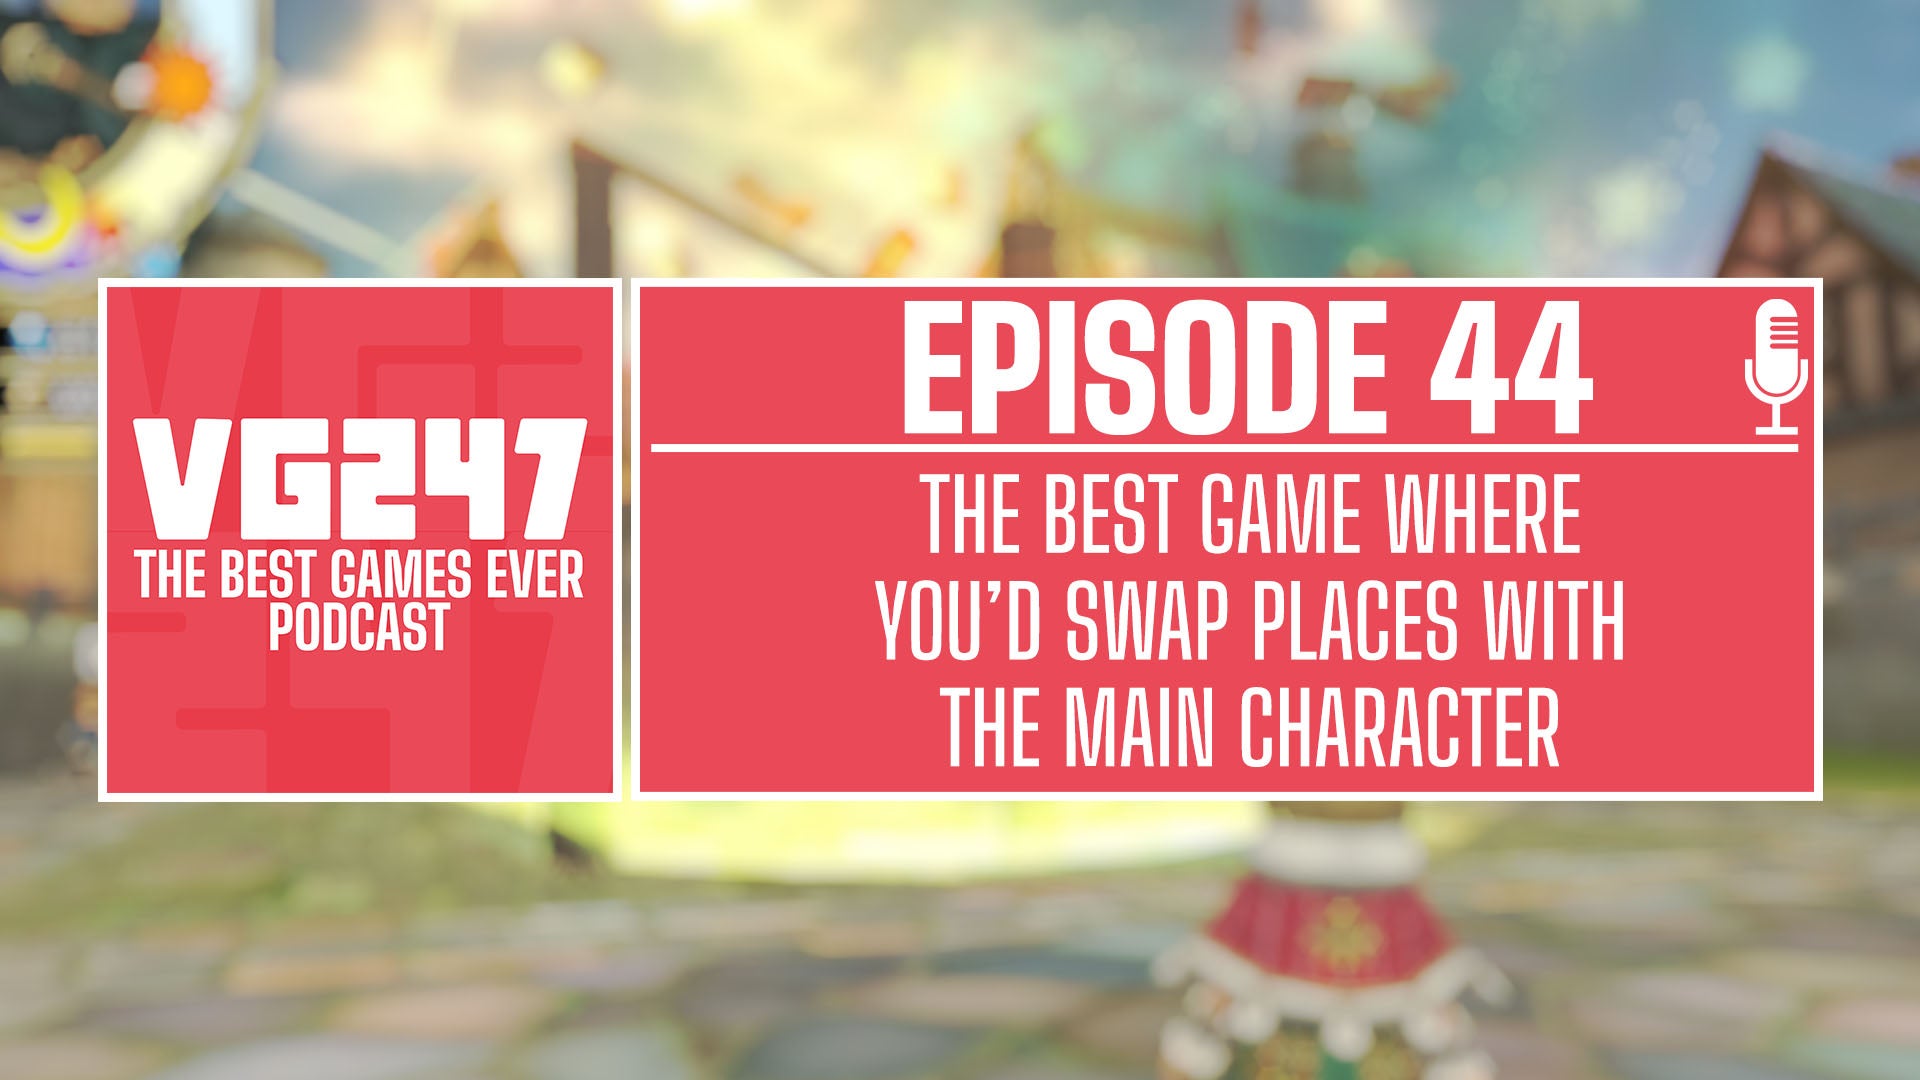 Image for VG247's The Best Games Ever Podcast – Ep.44: The best game where you'd swap places with the main character